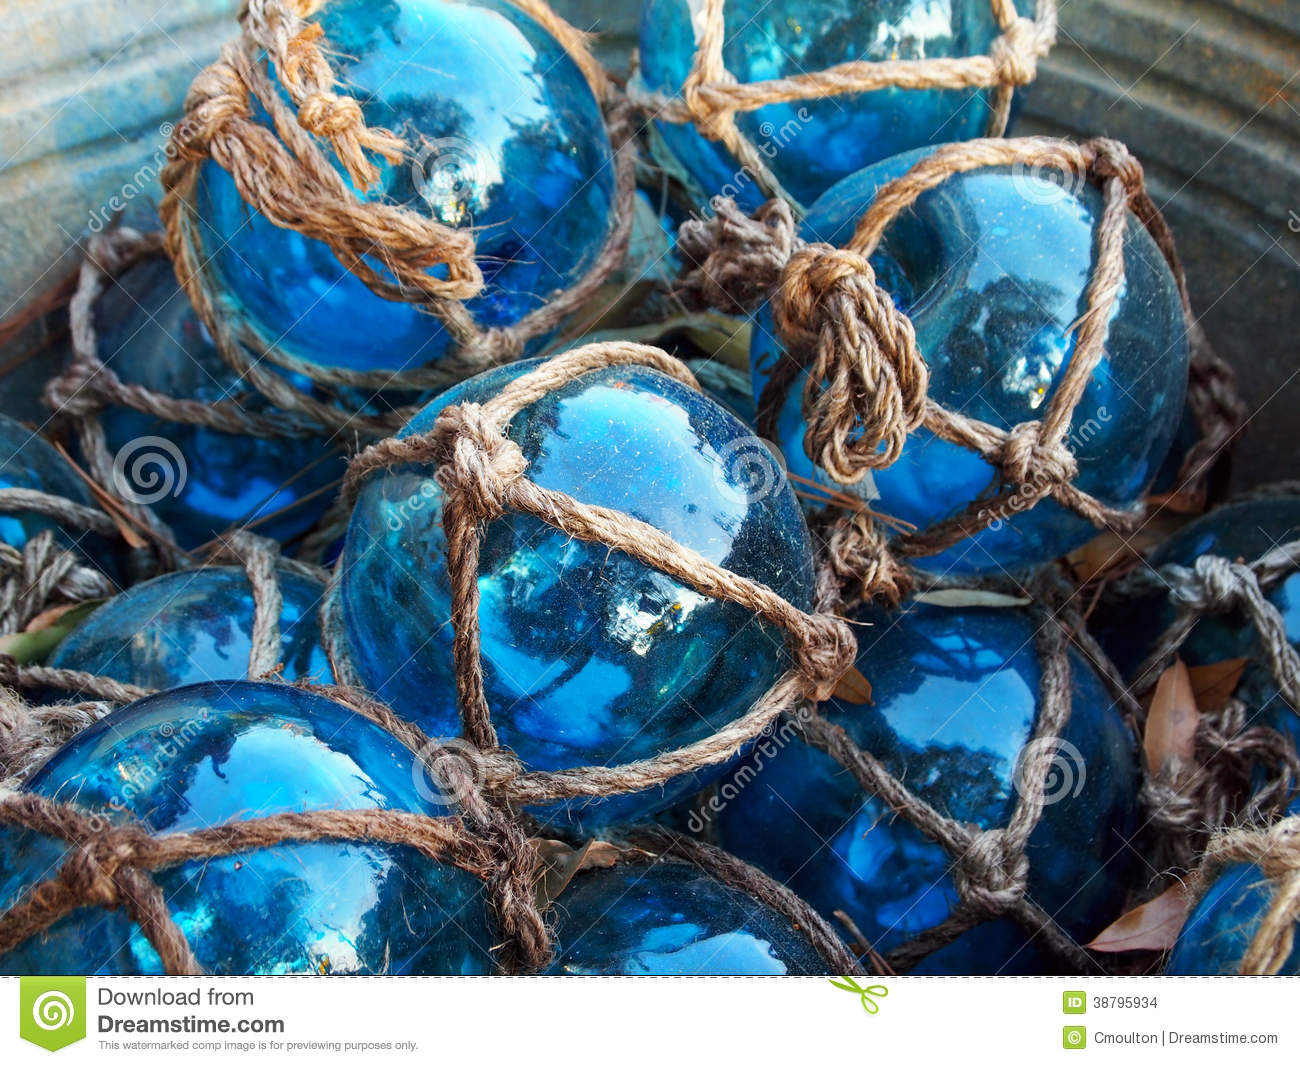 Glass Fishing Floats With Rope Knot Netting Piled In A Bucket